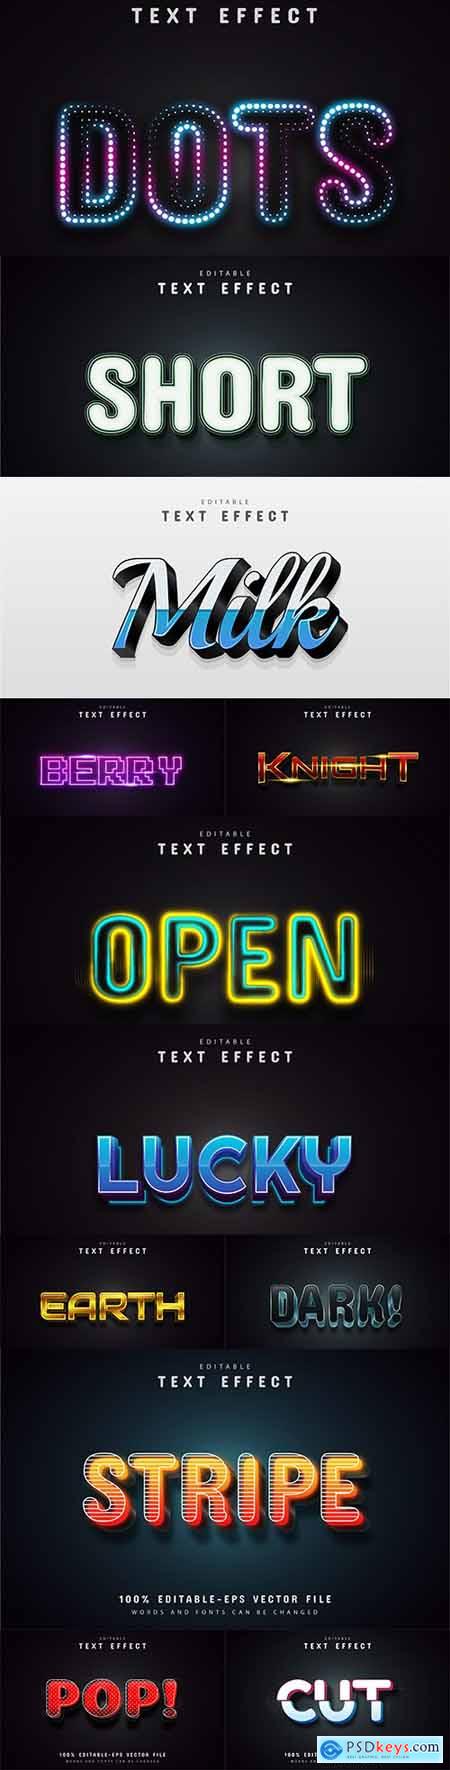 Editable font and 3d effect text design collection illustration 55